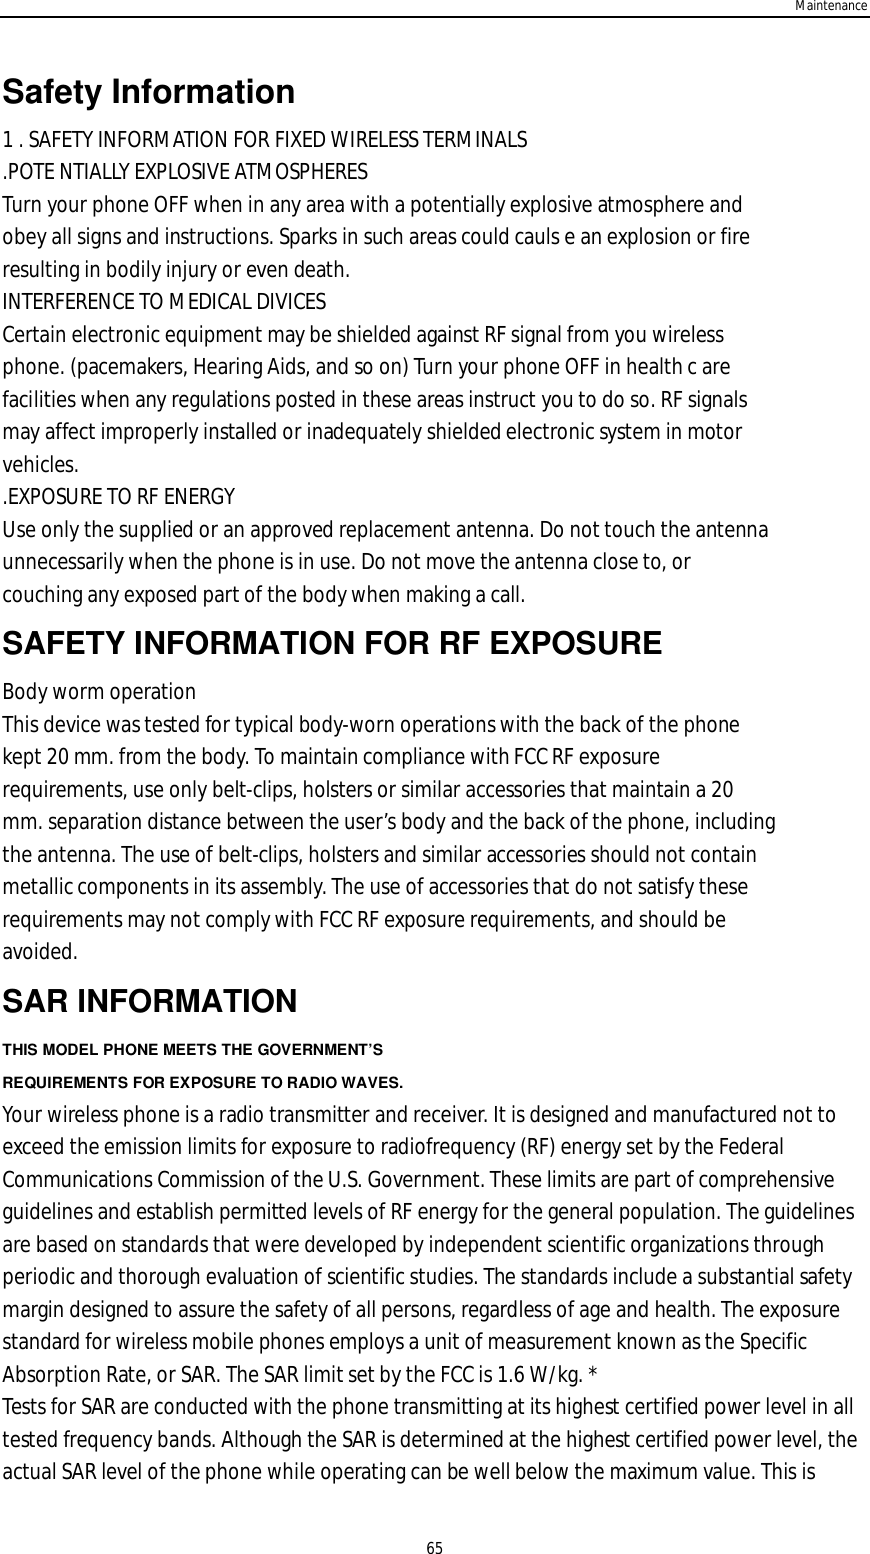 Maintenance65Safety Information1 . SAFETY INFORMATION FOR FIXED WIRELESS TERMINALS.POTE NTIALLY EXPLOSIVE ATMOSPHERESTurn your phone OFF when in any area with a potentially explosive atmosphere andobey all signs and instructions. Sparks in such areas could cauls e an explosion or fireresulting in bodily injury or even death.INTERFERENCE TO MEDICAL DIVICESCertain electronic equipment may be shielded against RF signal from you wirelessphone. (pacemakers, Hearing Aids, and so on) Turn your phone OFF in health c arefacilities when any regulations posted in these areas instruct you to do so. RF signalsmay affect improperly installed or inadequately shielded electronic system in motorvehicles..EXPOSURE TO RF ENERGYUse only the supplied or an approved replacement antenna. Do not touch the antennaunnecessarily when the phone is in use. Do not move the antenna close to, orcouching any exposed part of the body when making a call.SAFETY INFORMATION FOR RF EXPOSUREBody worm operationThis device was tested for typical body-worn operations with the back of the phonekept 20 mm. from the body. To maintain compliance with FCC RF exposurerequirements, use only belt-clips, holsters or similar accessories that maintain a 20mm. separation distance between the user’s body and the back of the phone, includingthe antenna. The use of belt-clips, holsters and similar accessories should not containmetallic components in its assembly. The use of accessories that do not satisfy theserequirements may not comply with FCC RF exposure requirements, and should beavoided.SAR INFORMATIONTHIS MODEL PHONE MEETS THE GOVERNMENT’SREQUIREMENTS FOR EXPOSURE TO RADIO WAVES.Your wireless phone is a radio transmitter and receiver. It is designed and manufactured not toexceed the emission limits for exposure to radiofrequency (RF) energy set by the FederalCommunications Commission of the U.S. Government. These limits are part of comprehensiveguidelines and establish permitted levels of RF energy for the general population. The guidelinesare based on standards that were developed by independent scientific organizations throughperiodic and thorough evaluation of scientific studies. The standards include a substantial safetymargin designed to assure the safety of all persons, regardless of age and health. The exposurestandard for wireless mobile phones employs a unit of measurement known as the SpecificAbsorption Rate, or SAR. The SAR limit set by the FCC is 1.6 W/kg. *Tests for SAR are conducted with the phone transmitting at its highest certified power level in alltested frequency bands. Although the SAR is determined at the highest certified power level, theactual SAR level of the phone while operating can be well below the maximum value. This is